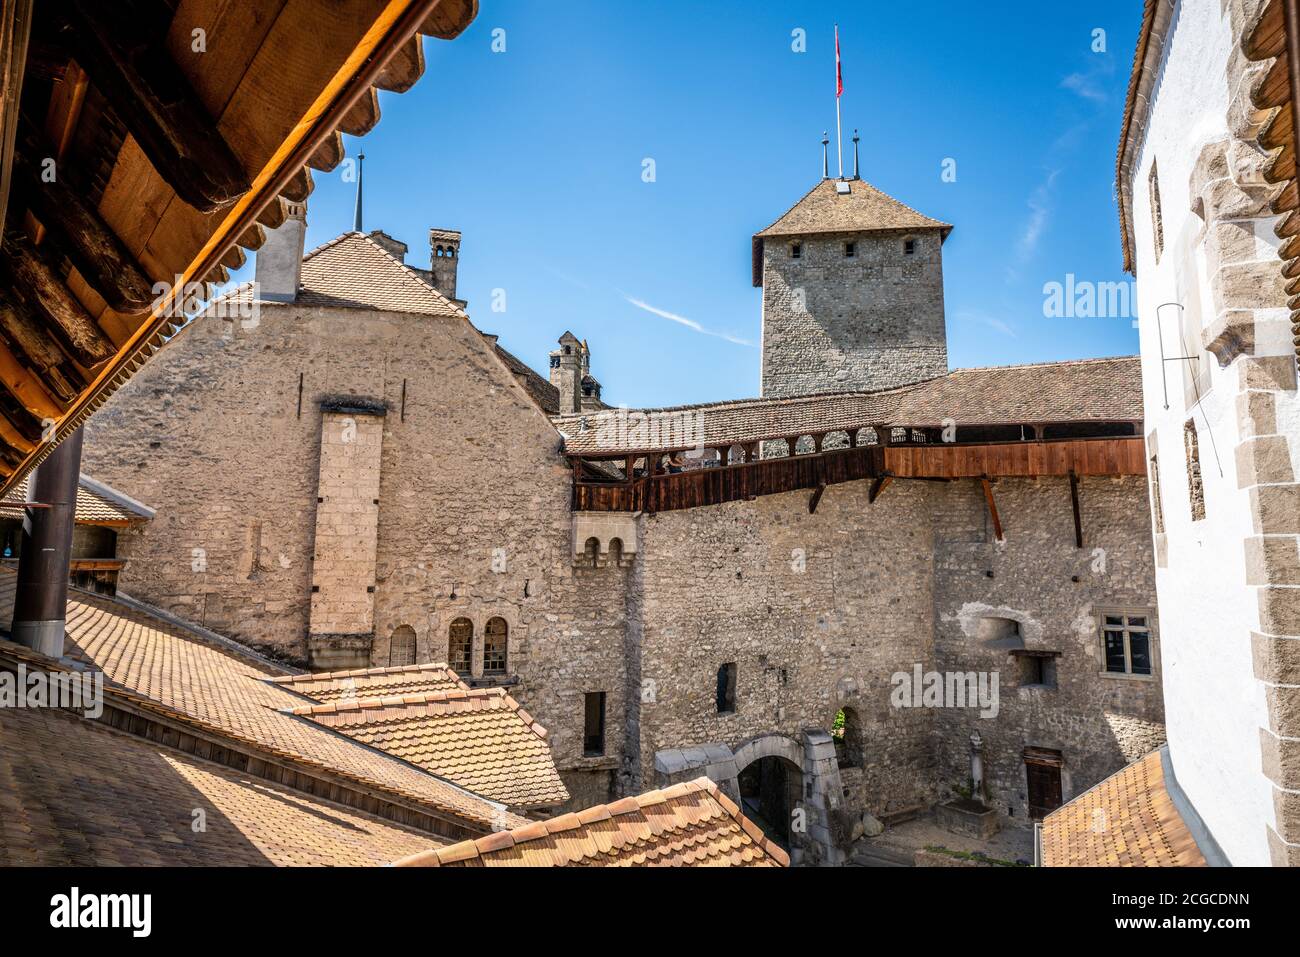 Chillon castle interior courtyard wide angle view with tower taken from wall walk in Vaud Switzerland Stock Photo